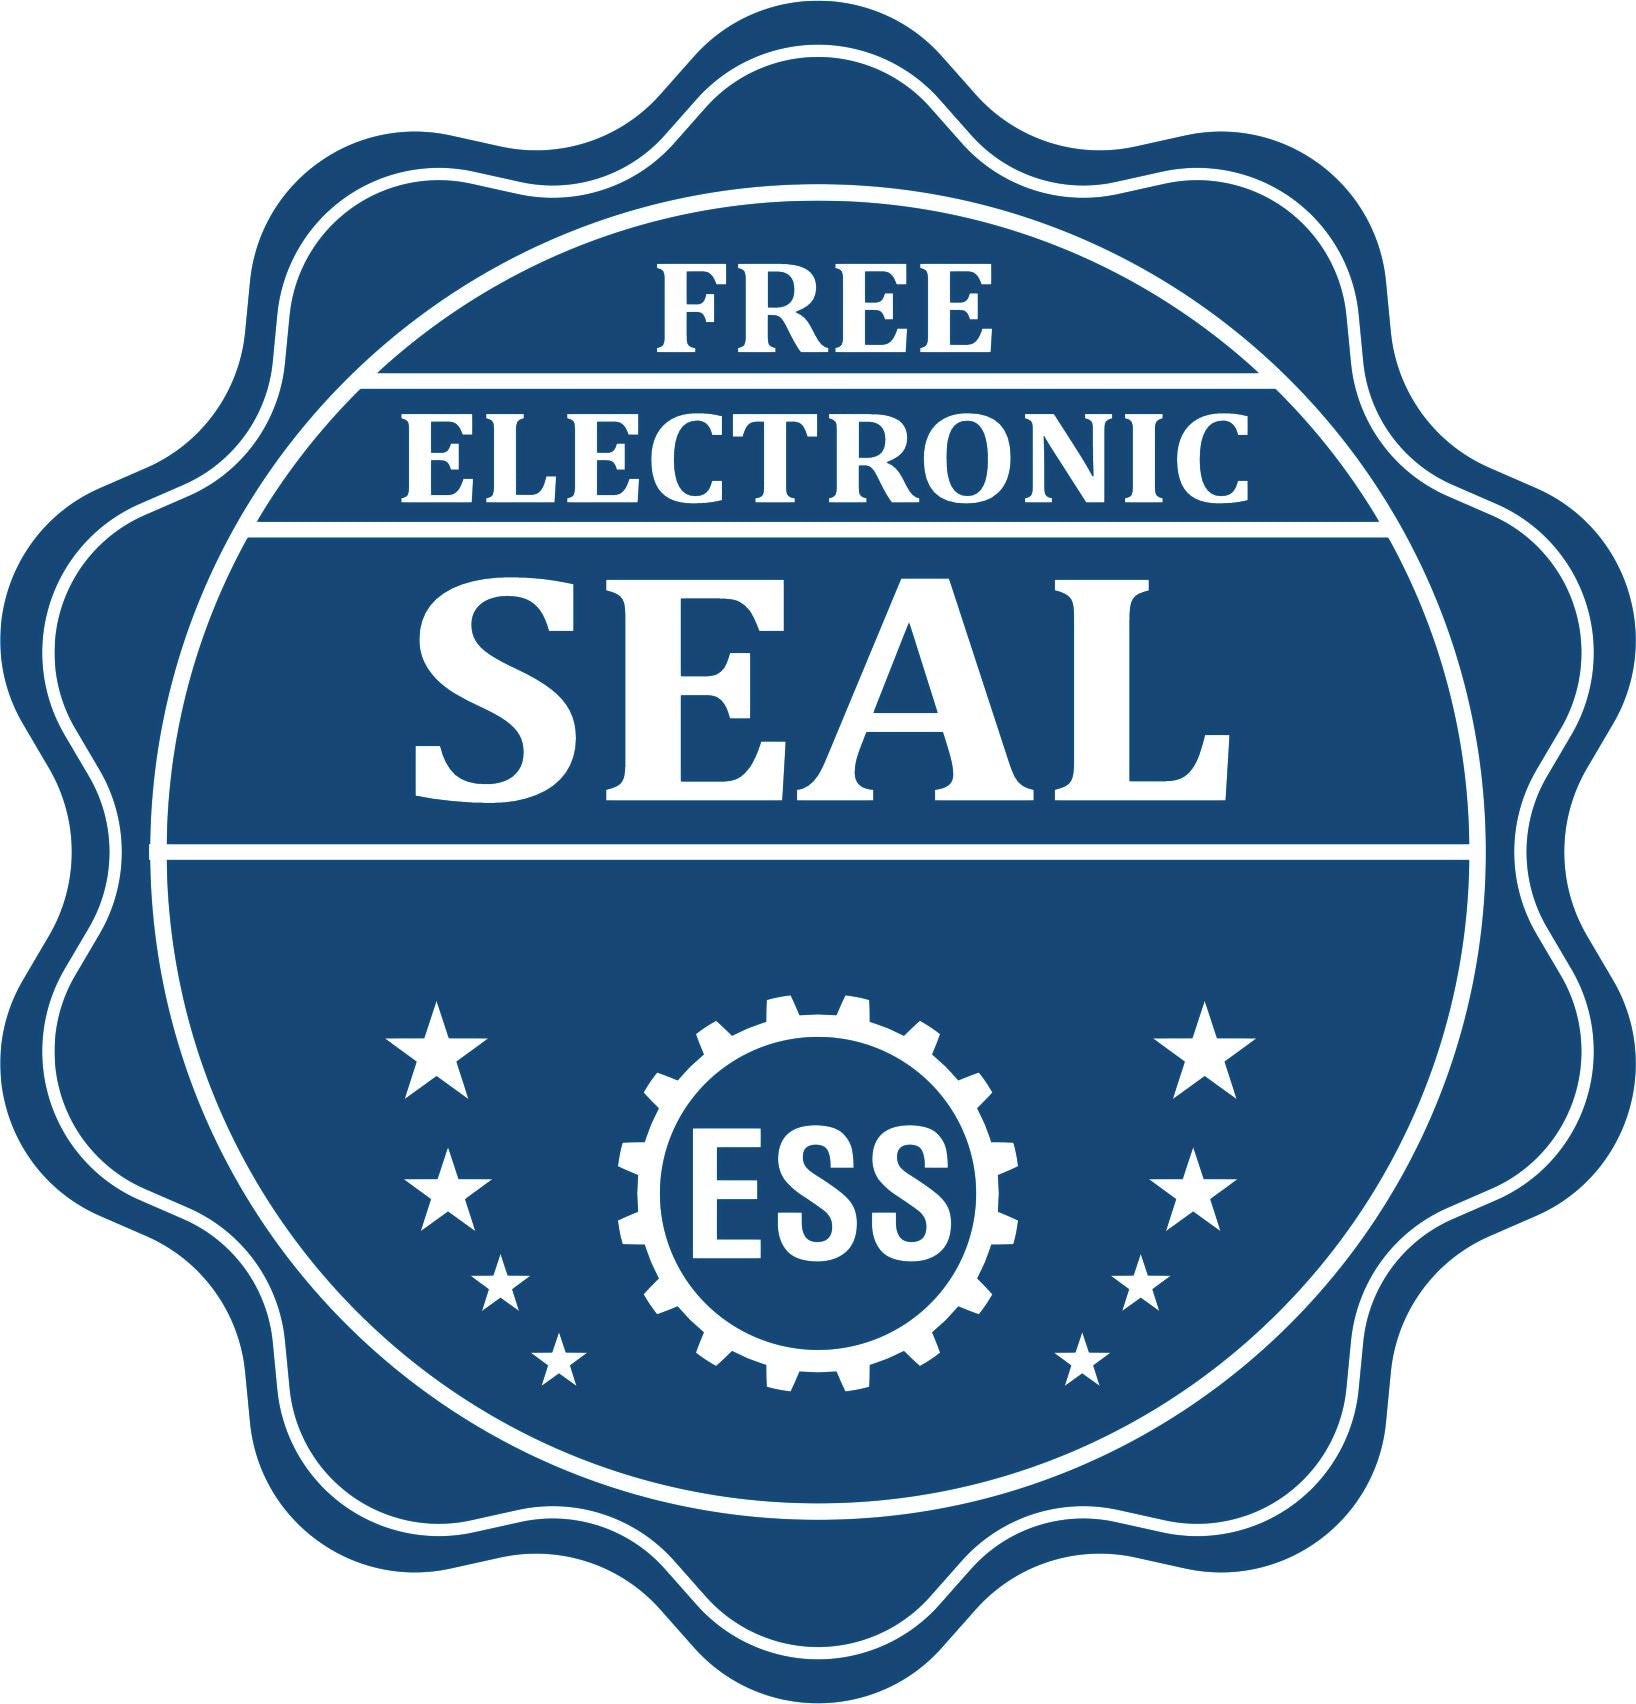 A badge showing a free electronic seal for the Delaware Professional Engineer Seal Stamp with stars and the ESS gear on the emblem.